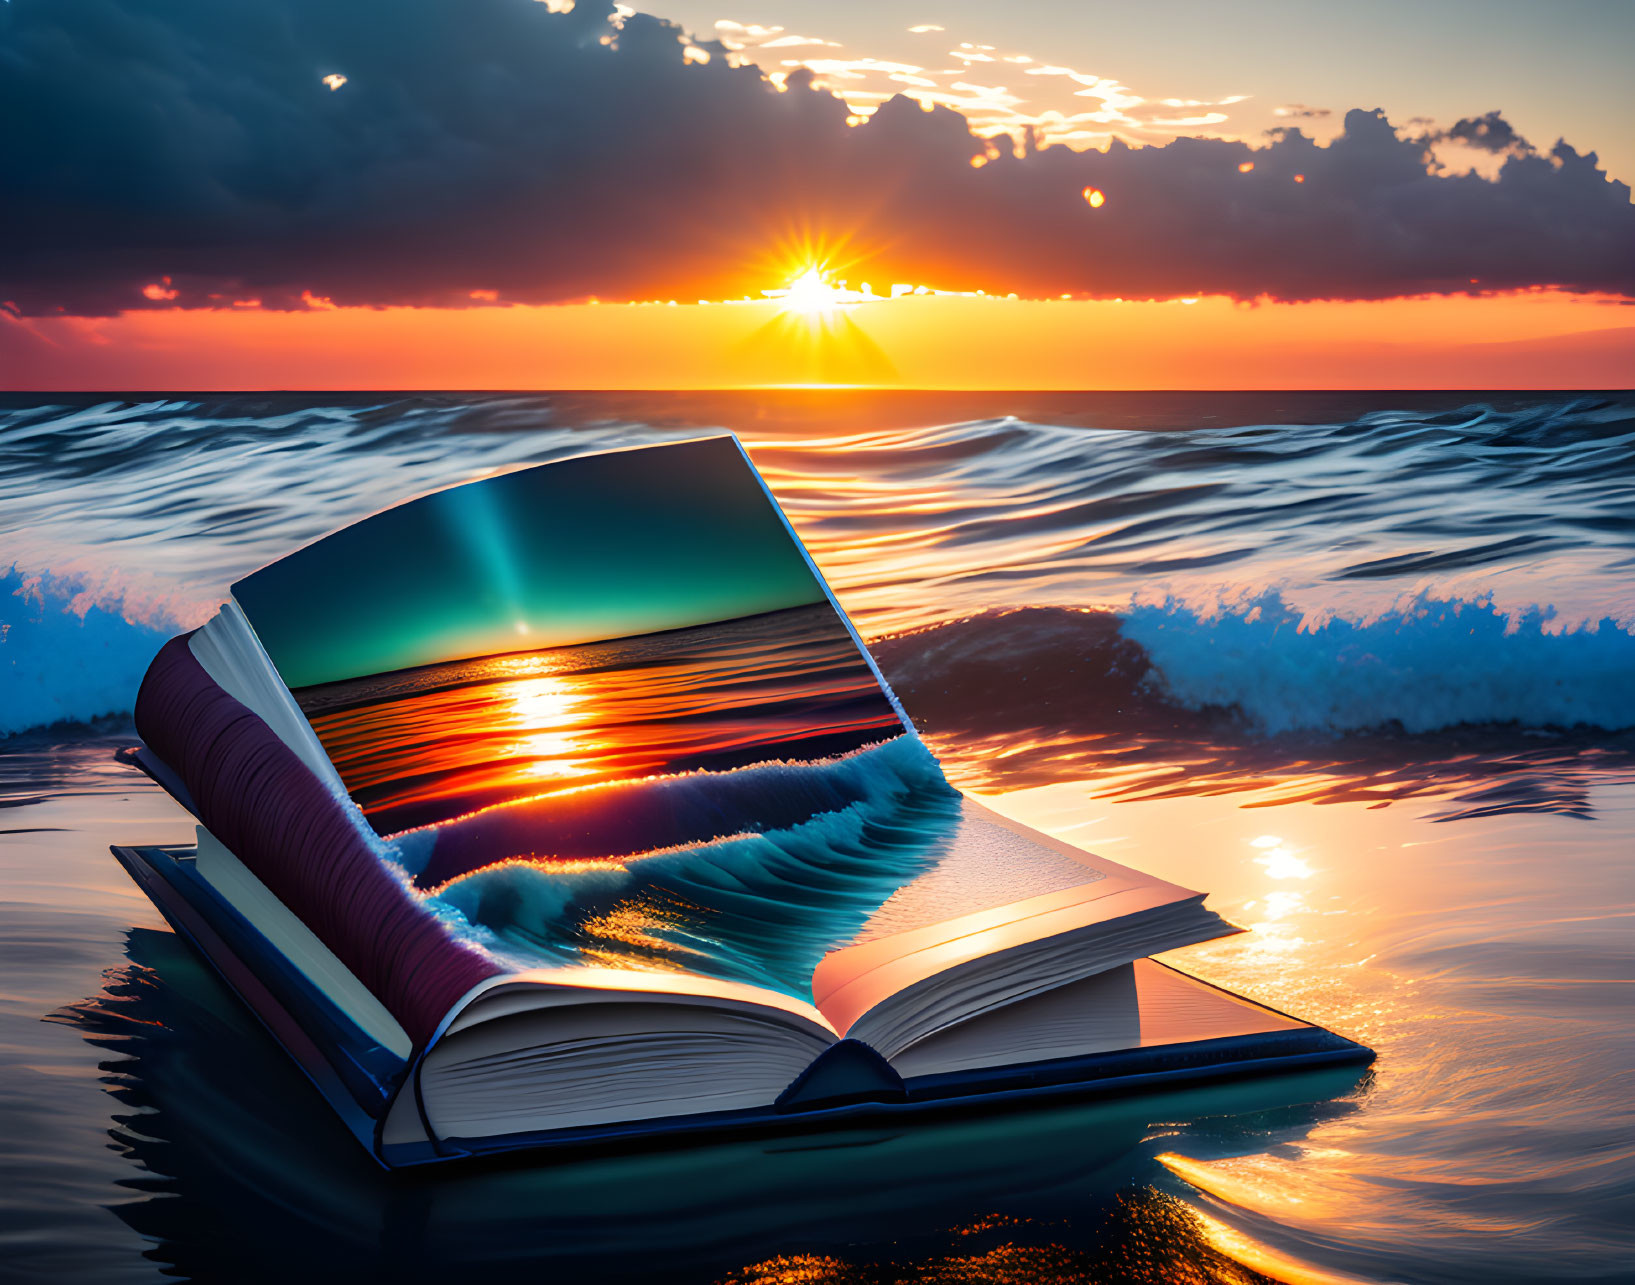 Book with Pages Blending into Ocean Waves at Sunset